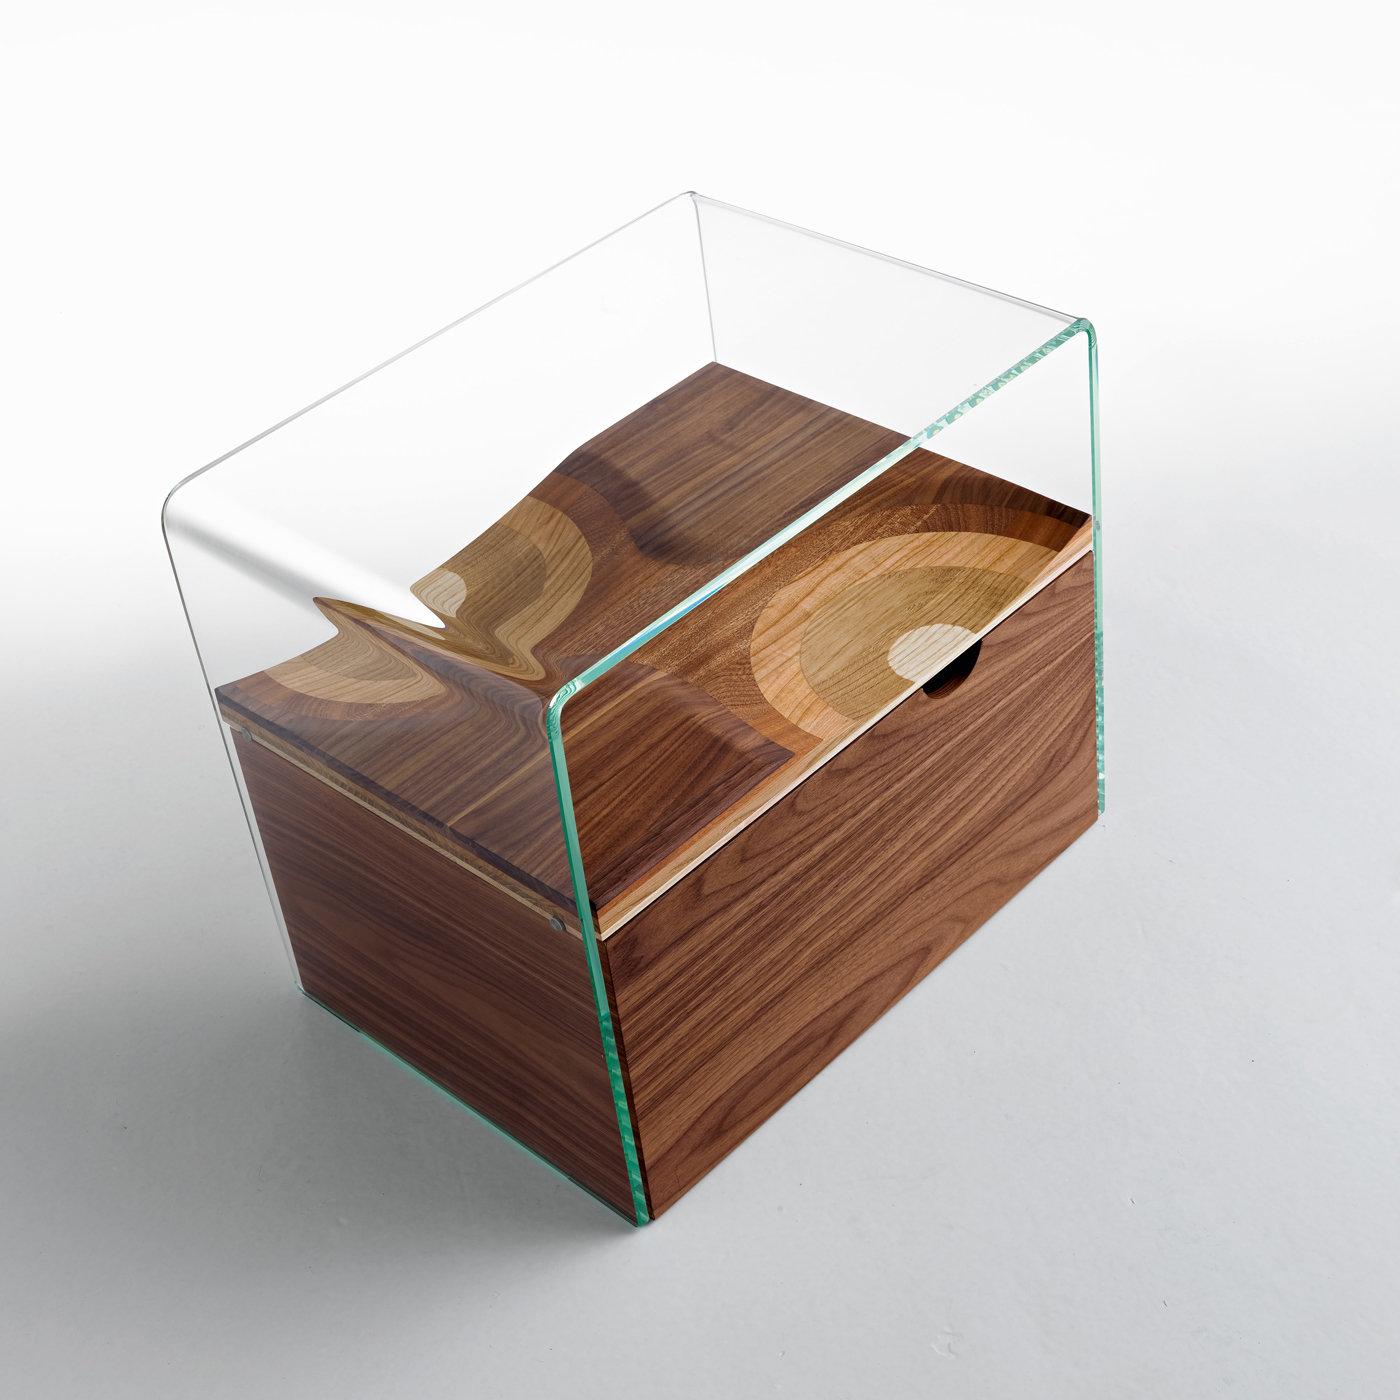 Exquisitely designed by Toyo Ito and part of the Ripples collection, this nightstand features a shelf made of five different types of wood (walnut, cherry, mahogany, ash, and oak), enclosed in an extra clear tempered glass frame, creating a “trompe